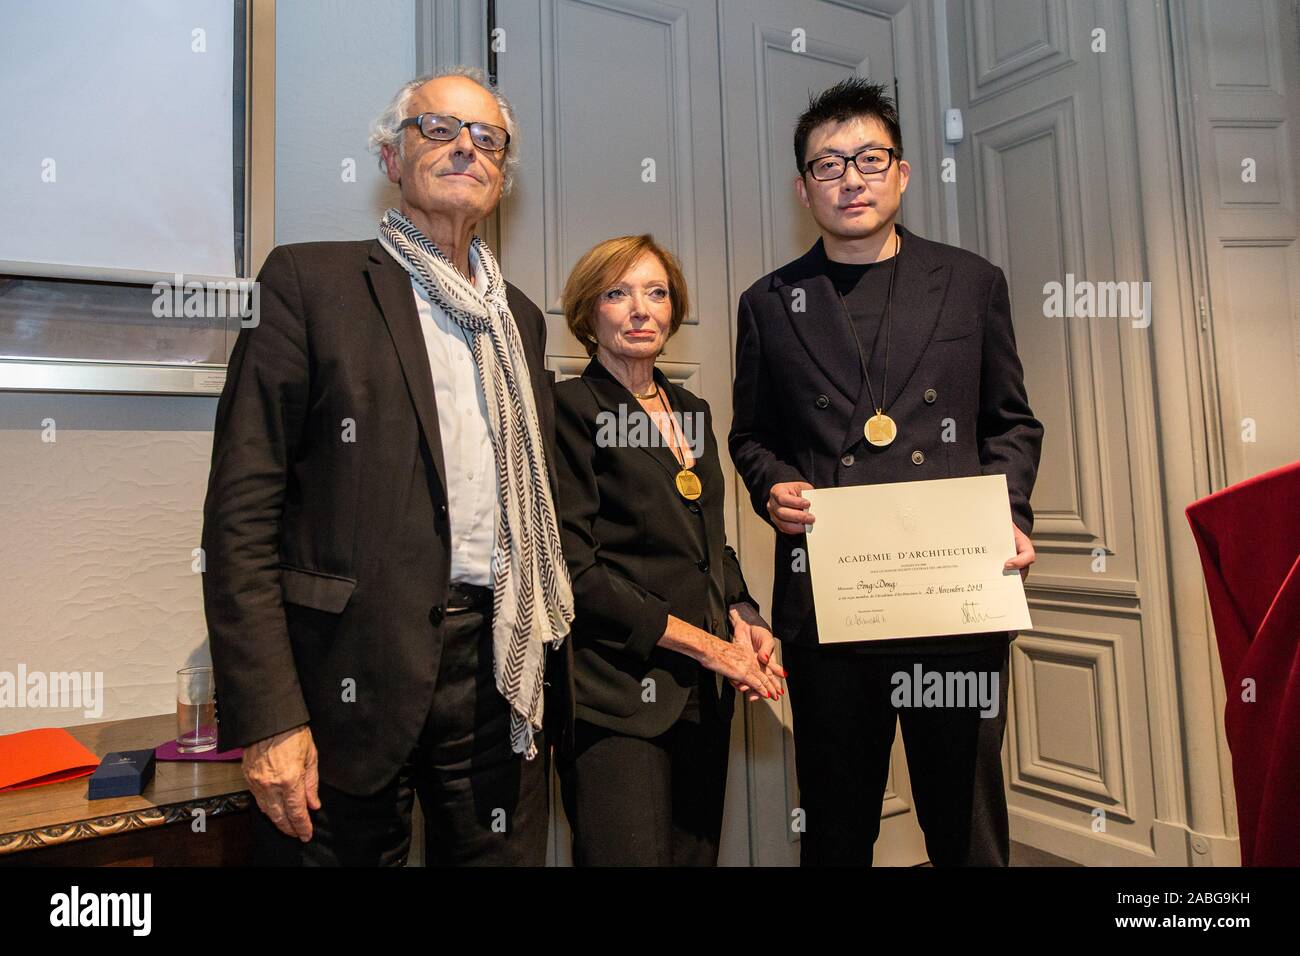 Paris, France. 26th Nov, 2019. Dong Gong is presented the certificate at the installation ceremony in Paris, France, Nov. 26, 2019. Chinese architect Dong Gong has formally become a foreign member of the French Academy of Architecture. Credit: Aurelien Morissard/Xinhua/Alamy Live News Stock Photo